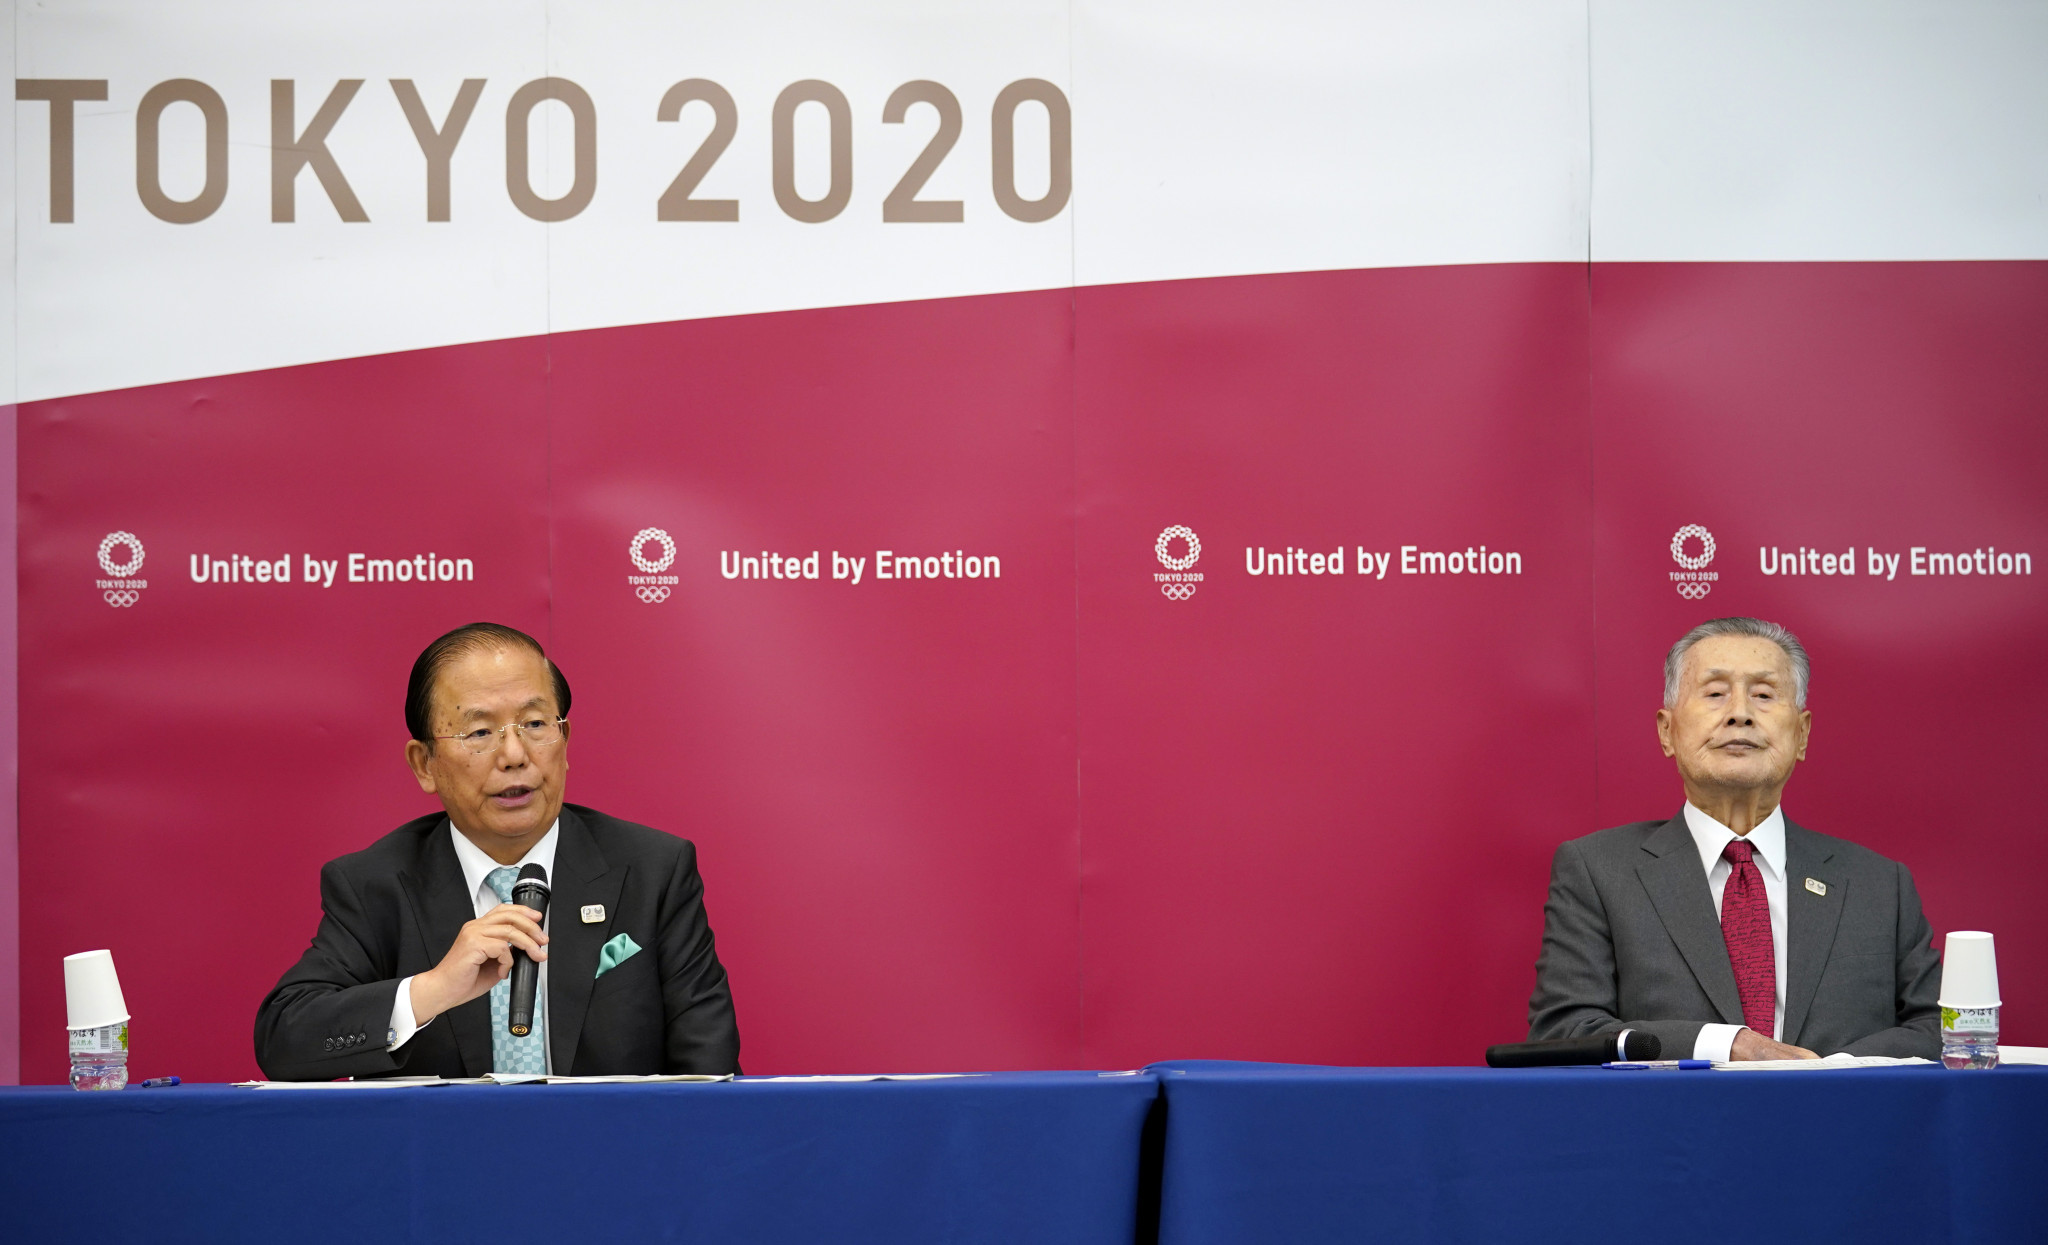 Tokyo 2020 will give an update on progress towards the postponed Olympic Games ©Getty Images